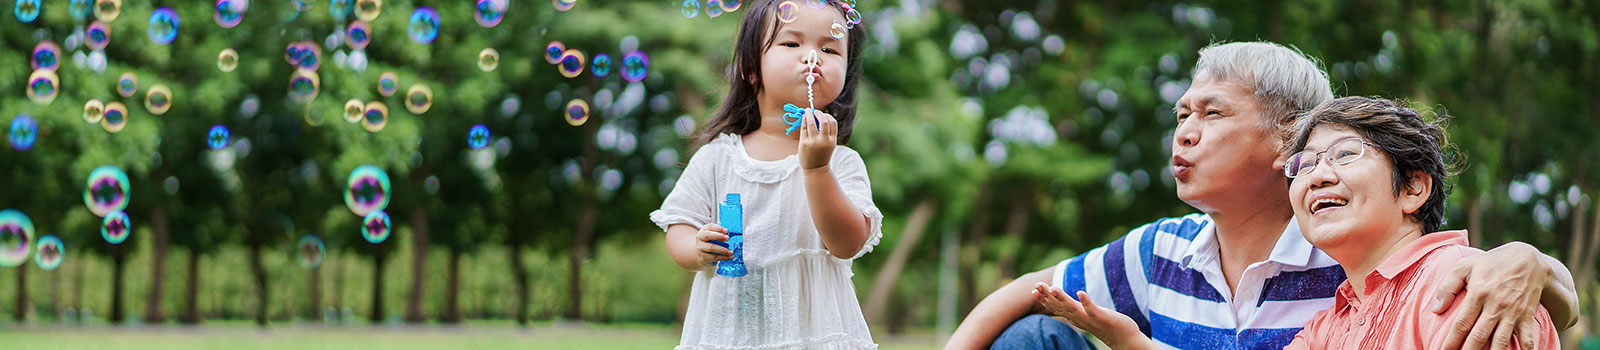 Granddaughter blowing bubbles with grandparents